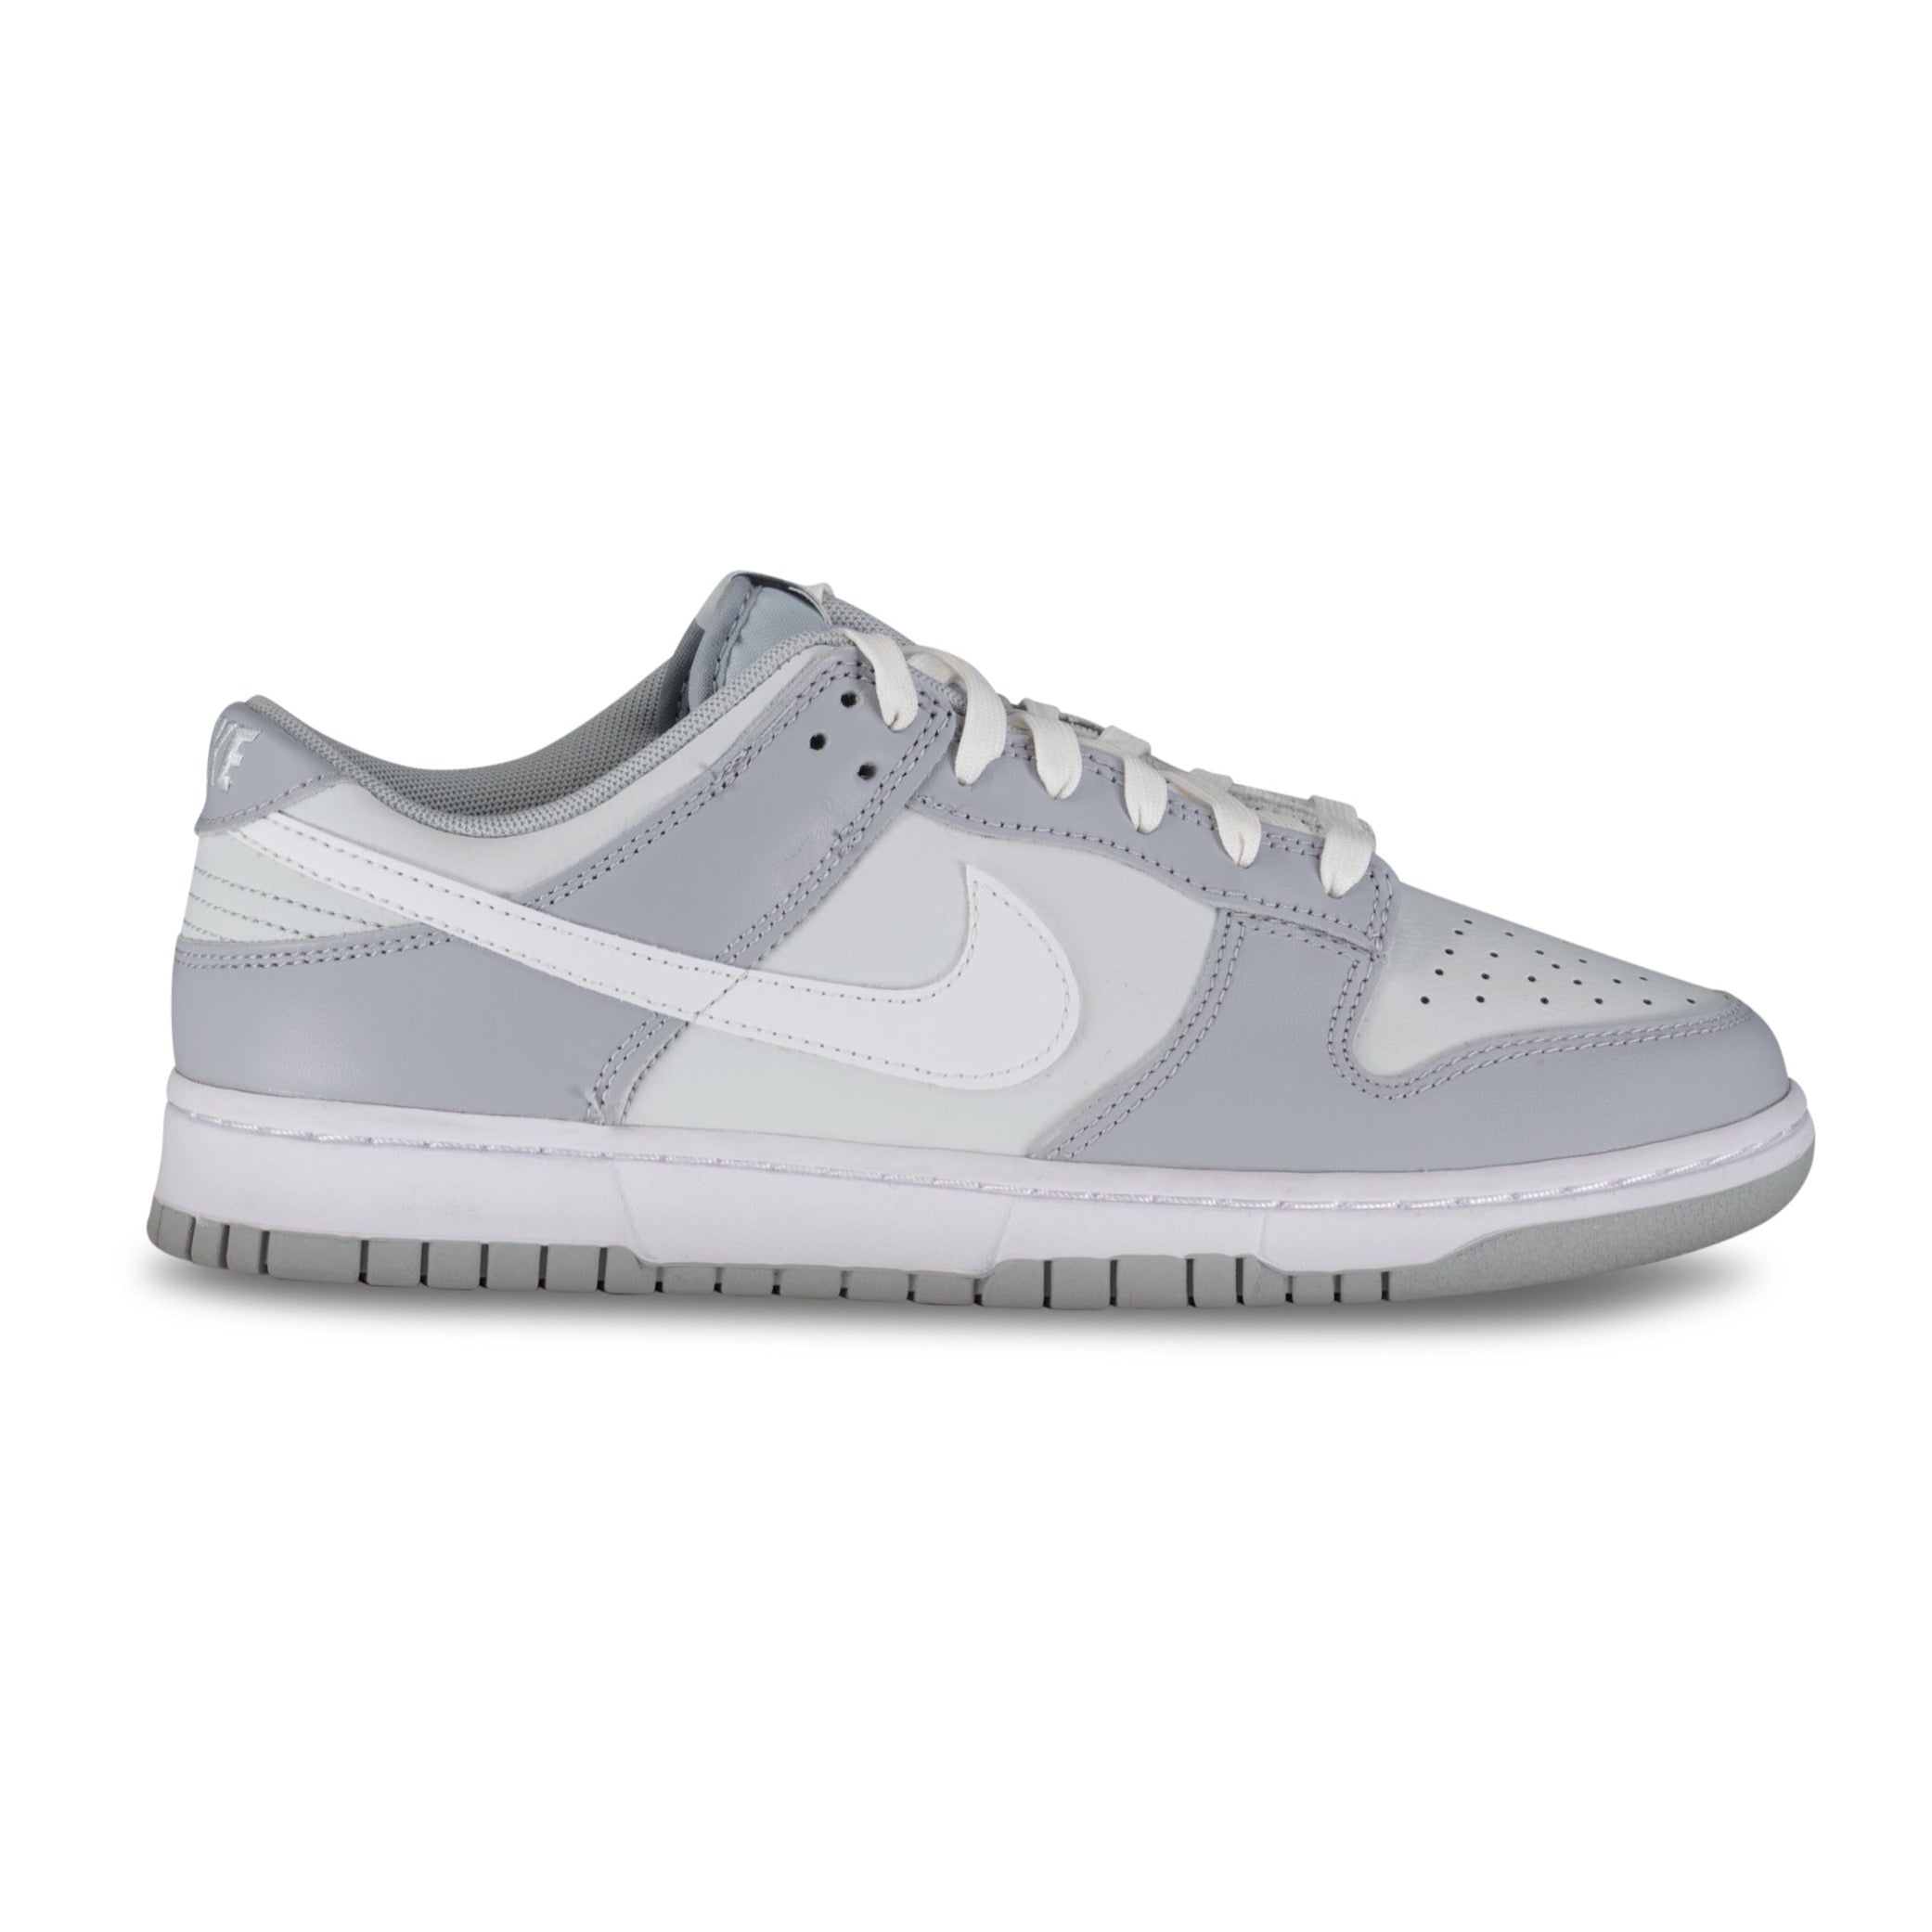 NIKE DUNK LOW 'WOLF GREY / TWO TONE' TRAINERS